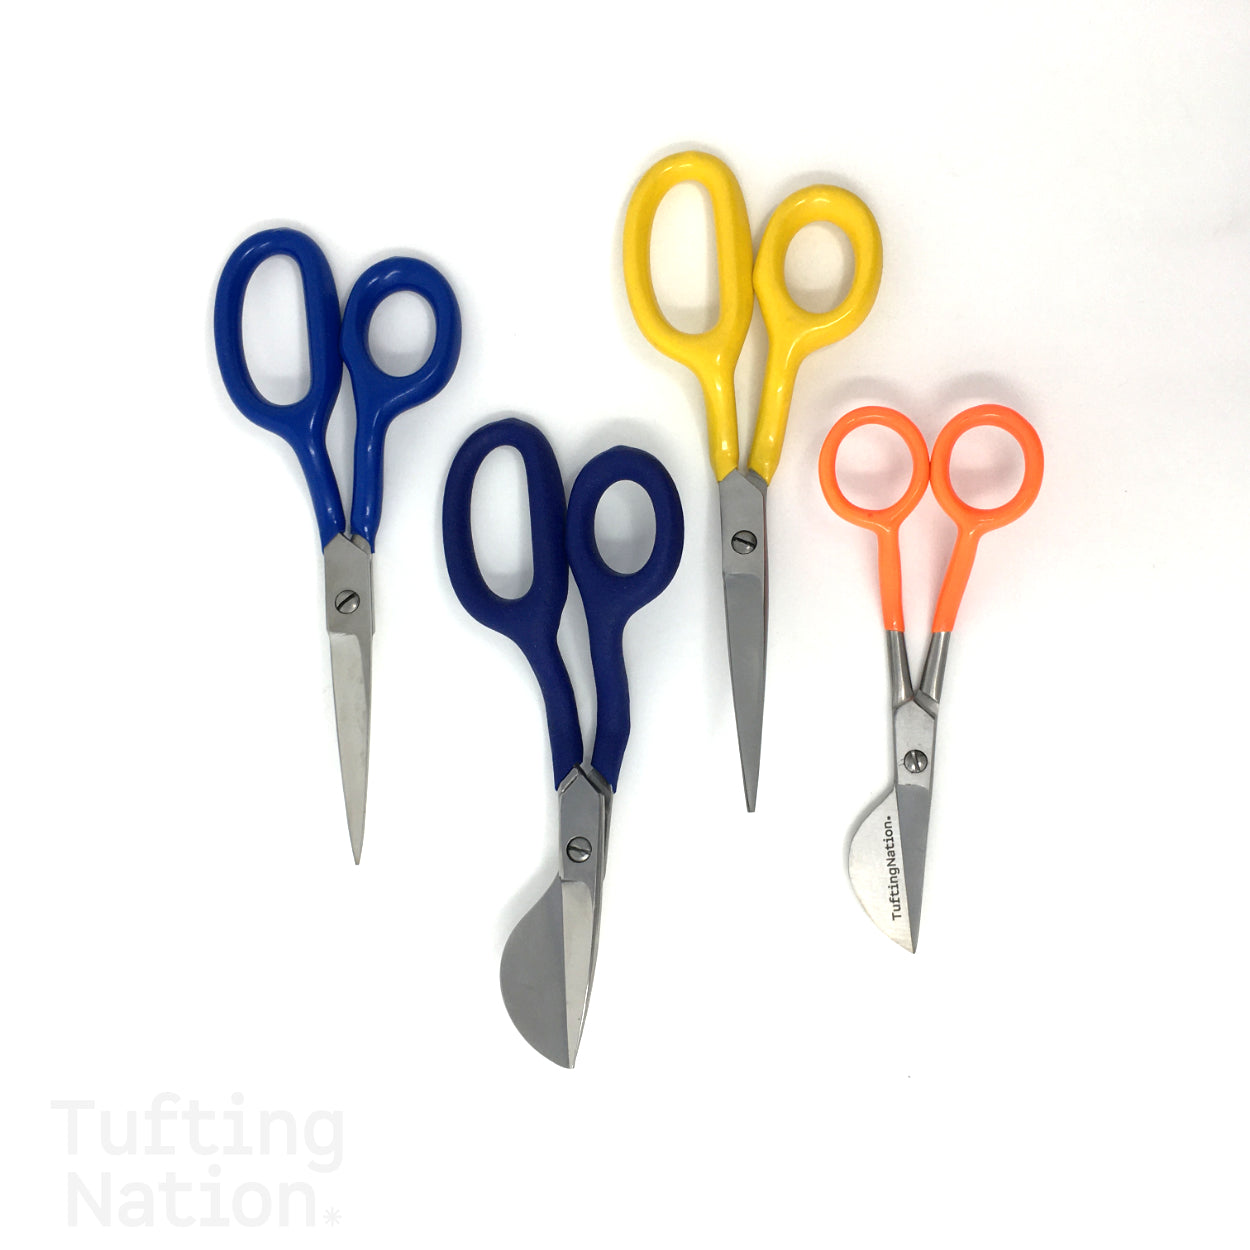 Duckbill Tufting Scissors and Carpet Napping Shears BUNDLE of 4 | TuftingNation Canada